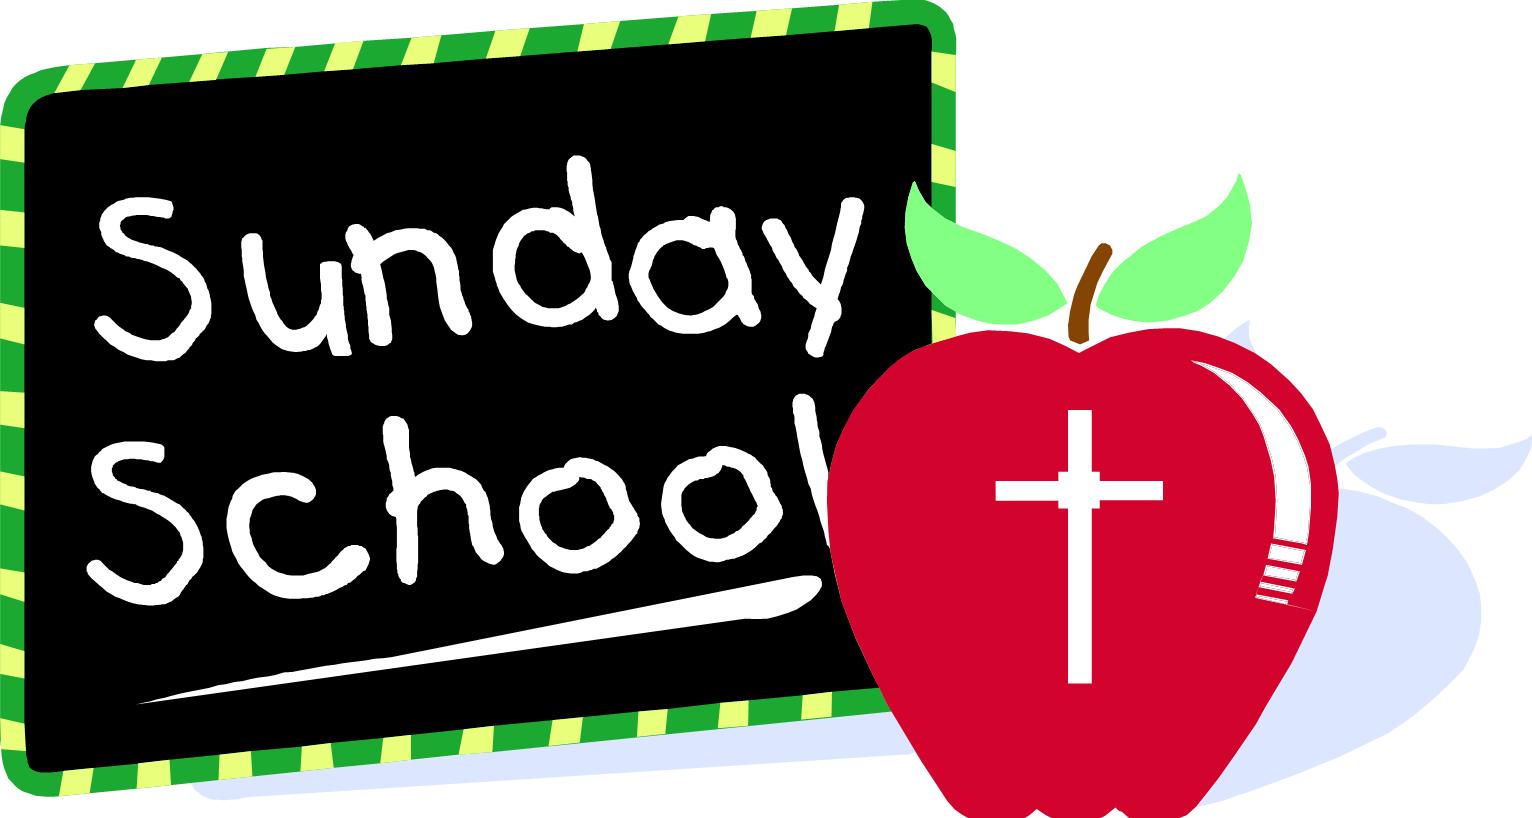 sunday school clipart images - photo #29